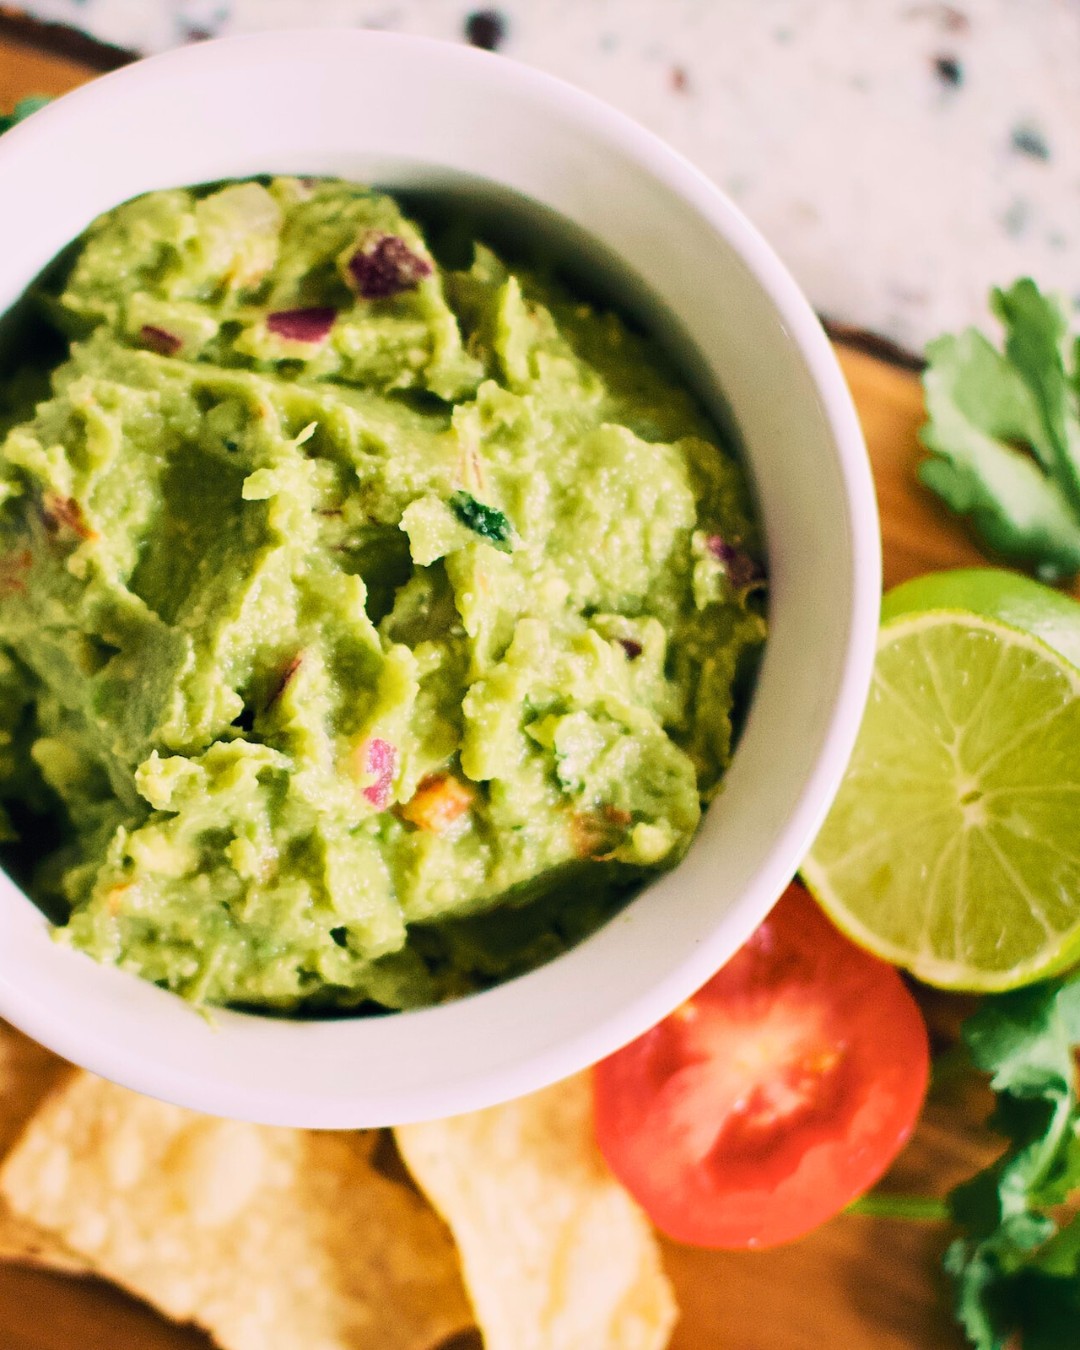 Dive into this easy guacamole recipe with 1 avocado! Perfect for a healthy snack or a flavorful addition to your meals, this recipe combines ripe avocado with red onion, garlic, jalapeno pepper, tomato, lime juice, cilantro, and seasoning for a zesty, creamy dip. Ideal for when you only have one avocado, this recipe balances the avocado's natural flavor with a medley of ingredients. Enjoy the health benefits of avocados and enjoy a burst of flavor with this simple, satisfying guacamole recipe!